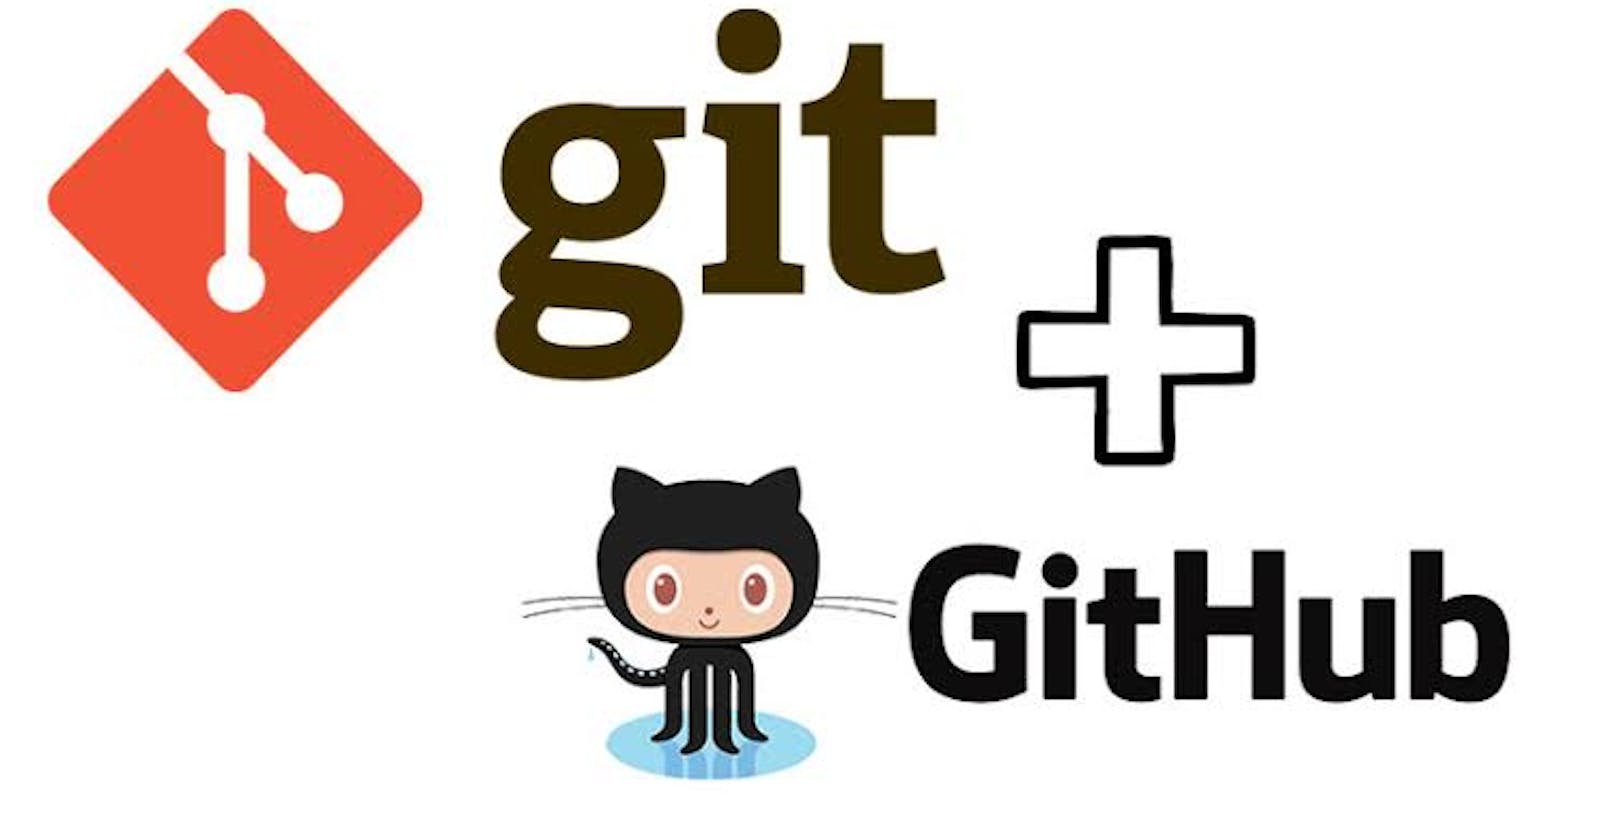 Revealing the mystery of Git and GitHub